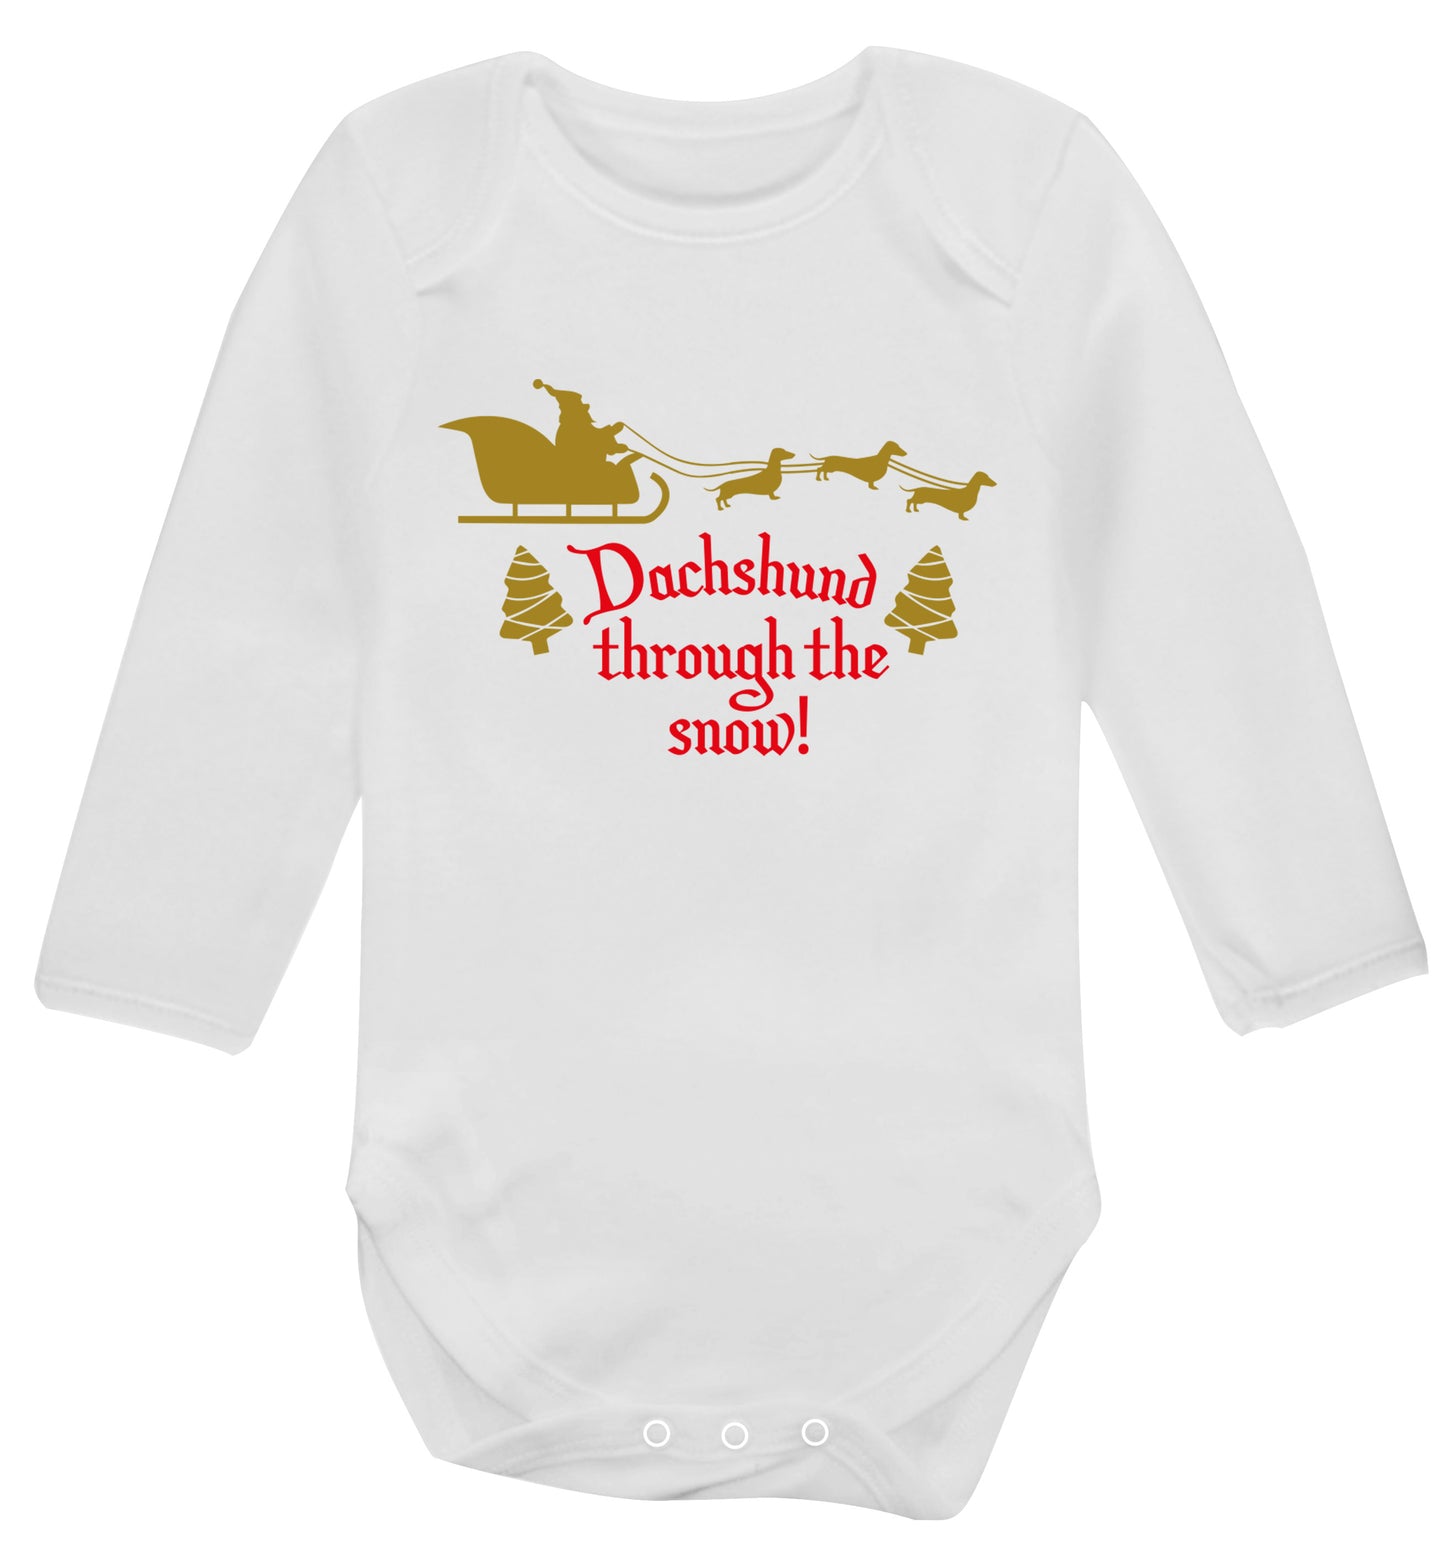 Dachshund through the snow Baby Vest long sleeved white 6-12 months